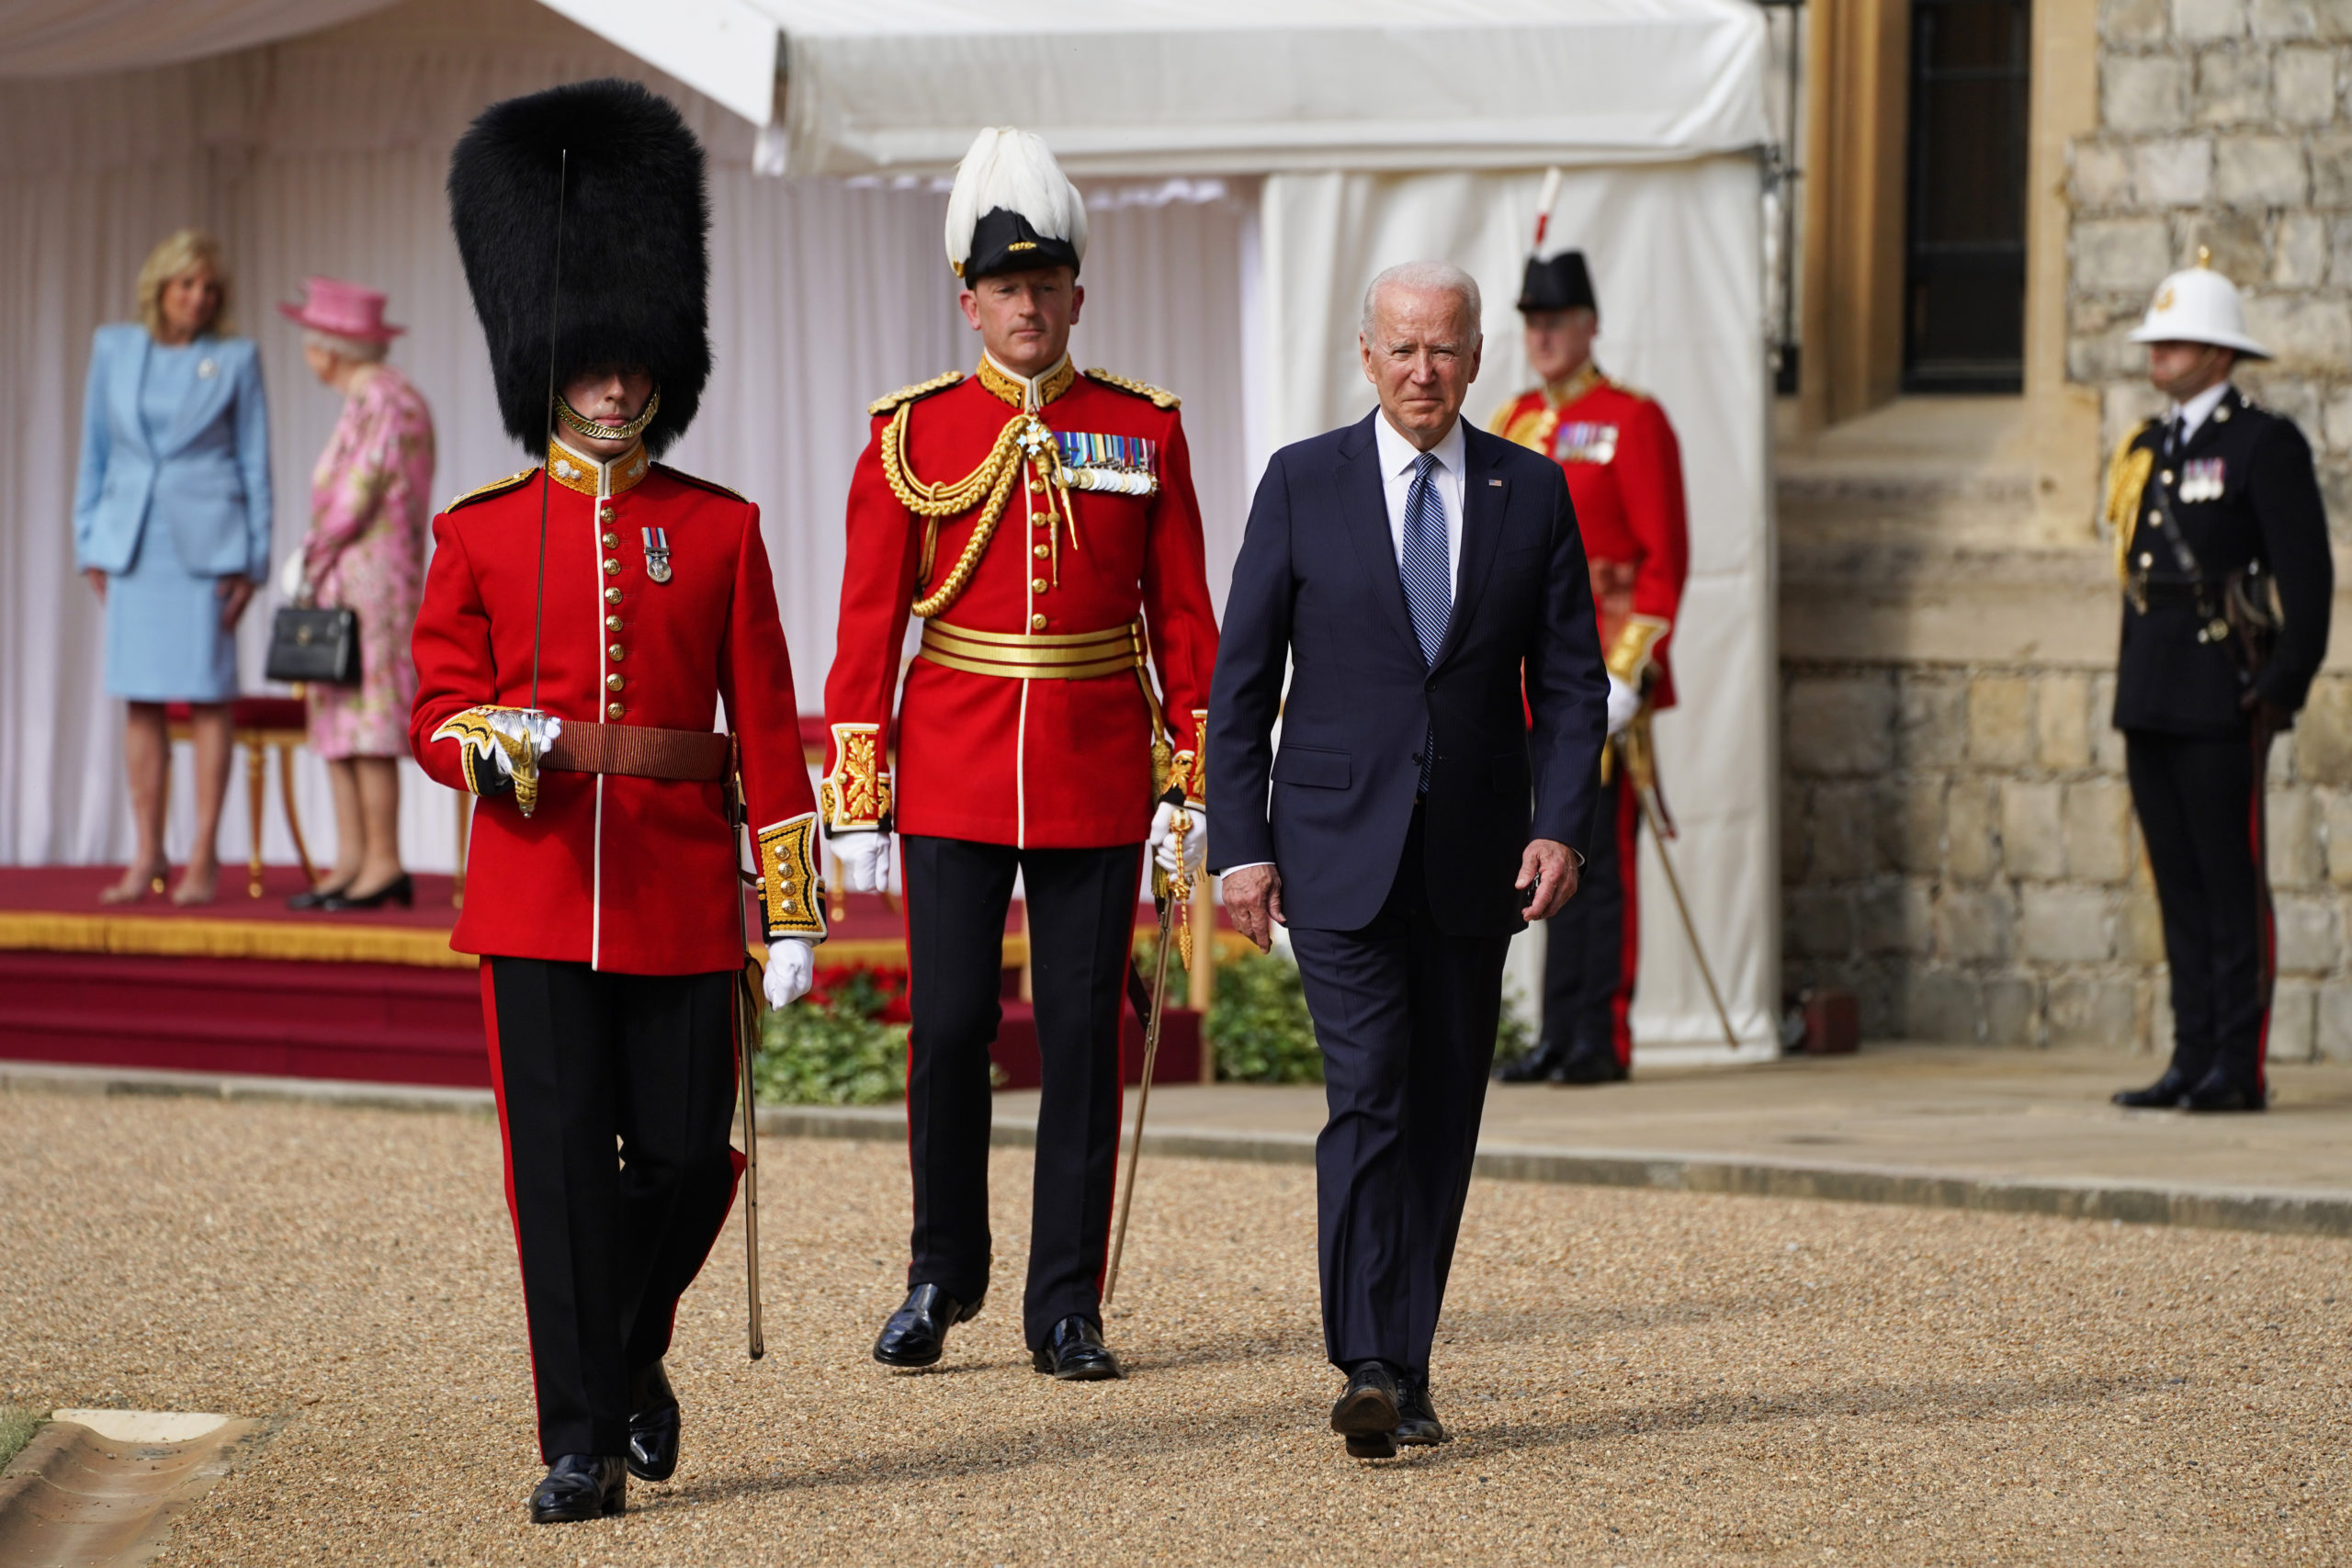 US President Joe Biden inspects a Guard of Honour during a visit to Windsor Castle to meet Queen Elizabeth II on June 13, 2021 in Windsor, England. Queen Elizabeth II hosts US President, Joe Biden and First Lady Dr Jill Biden at Windsor Castle. The President arrived from Cornwall where he attended the G7 Leader's Summit and will travel on to Brussels for a meeting of NATO Allies and later in the week he will meet President of Russia, Vladimir Putin. (Photo by Steve Parsons - WPA Pool/Getty Images)